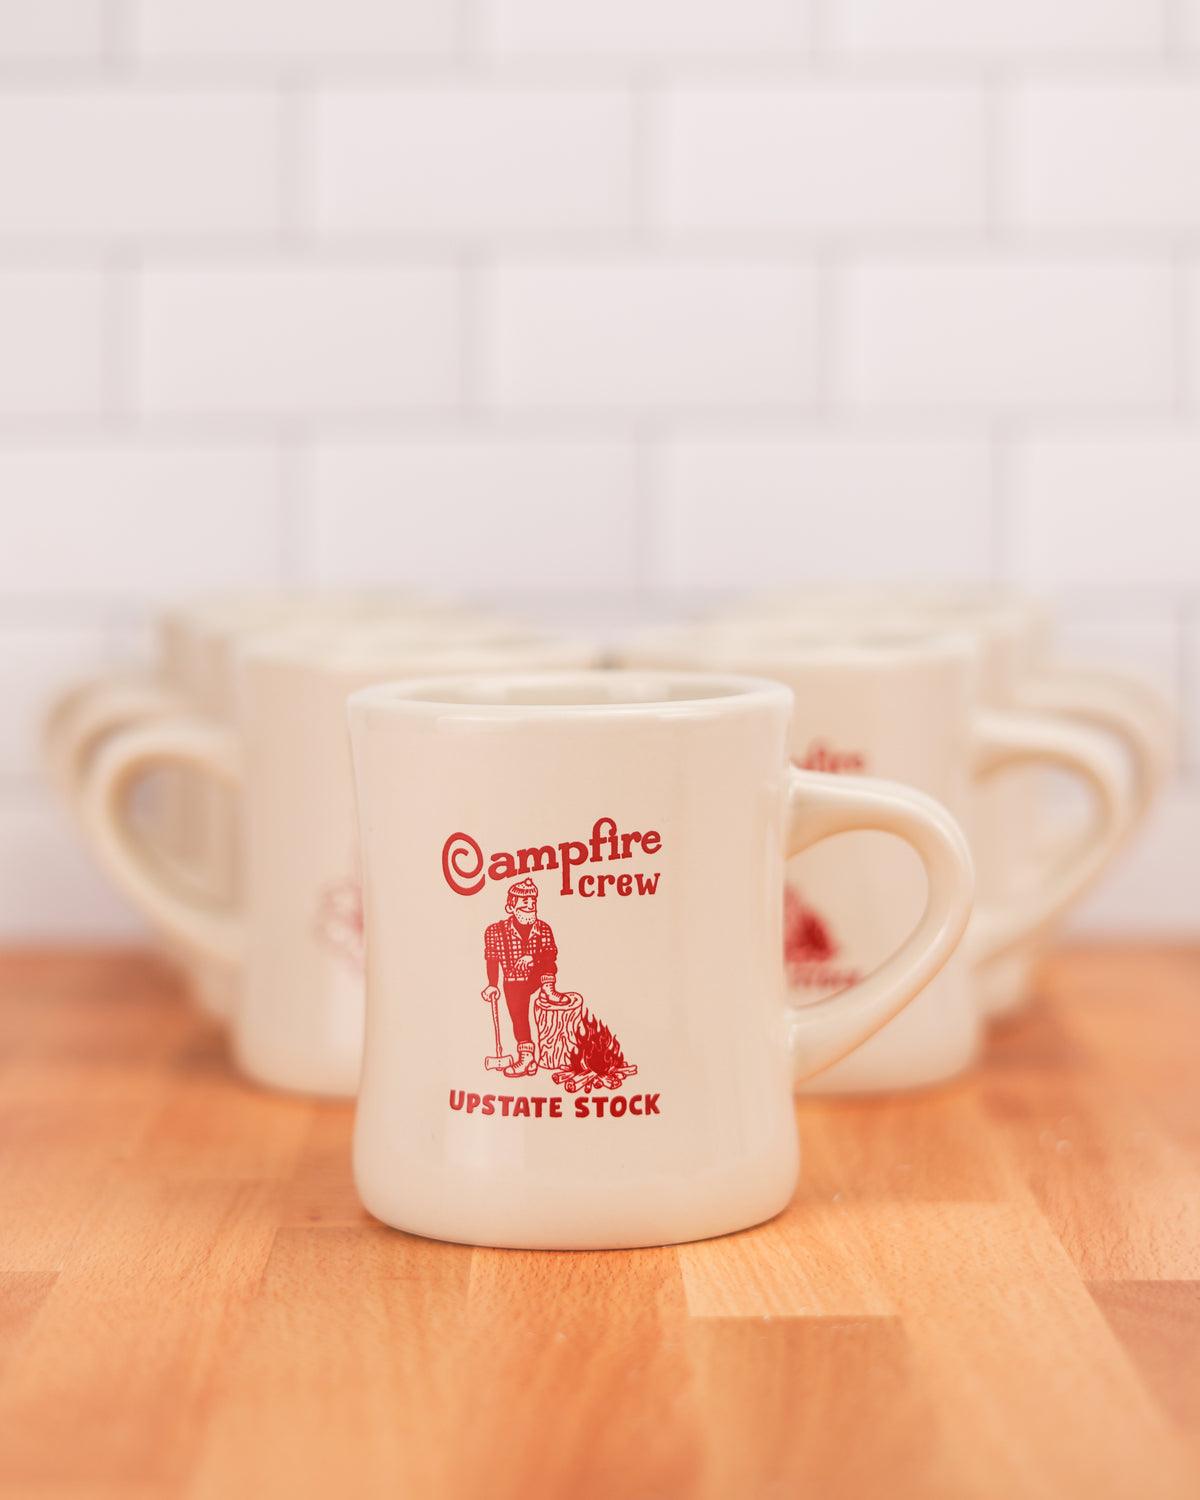 Upstate Stock x Created.co 12oz Classic Diner Mug - The Campfire Crew